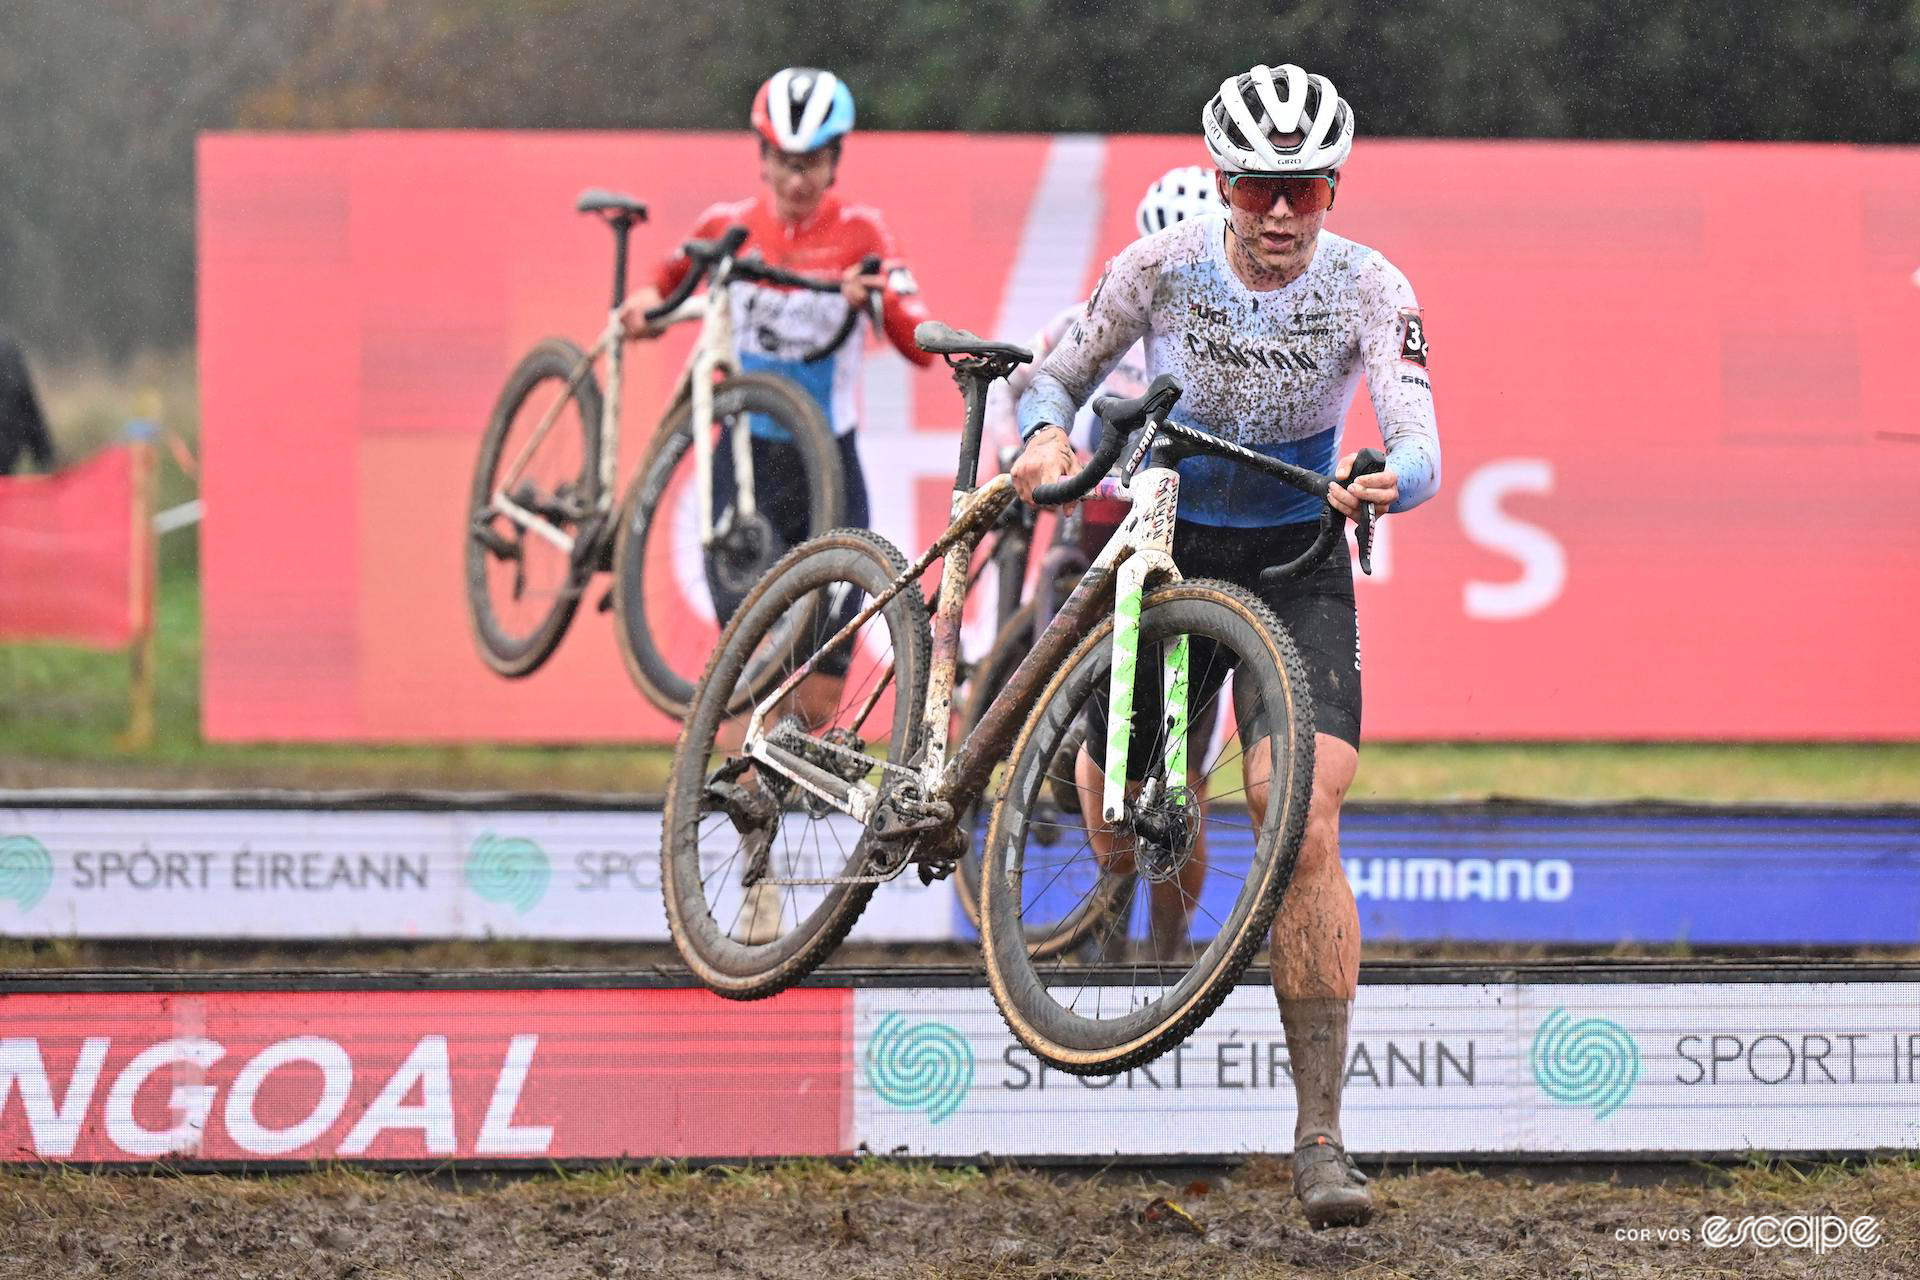 Zoe Bäckstedt deftly leaps the second barrier with her bike in hand early in CX World Cup Dublin, her kit only lightly splattered with mud so far.